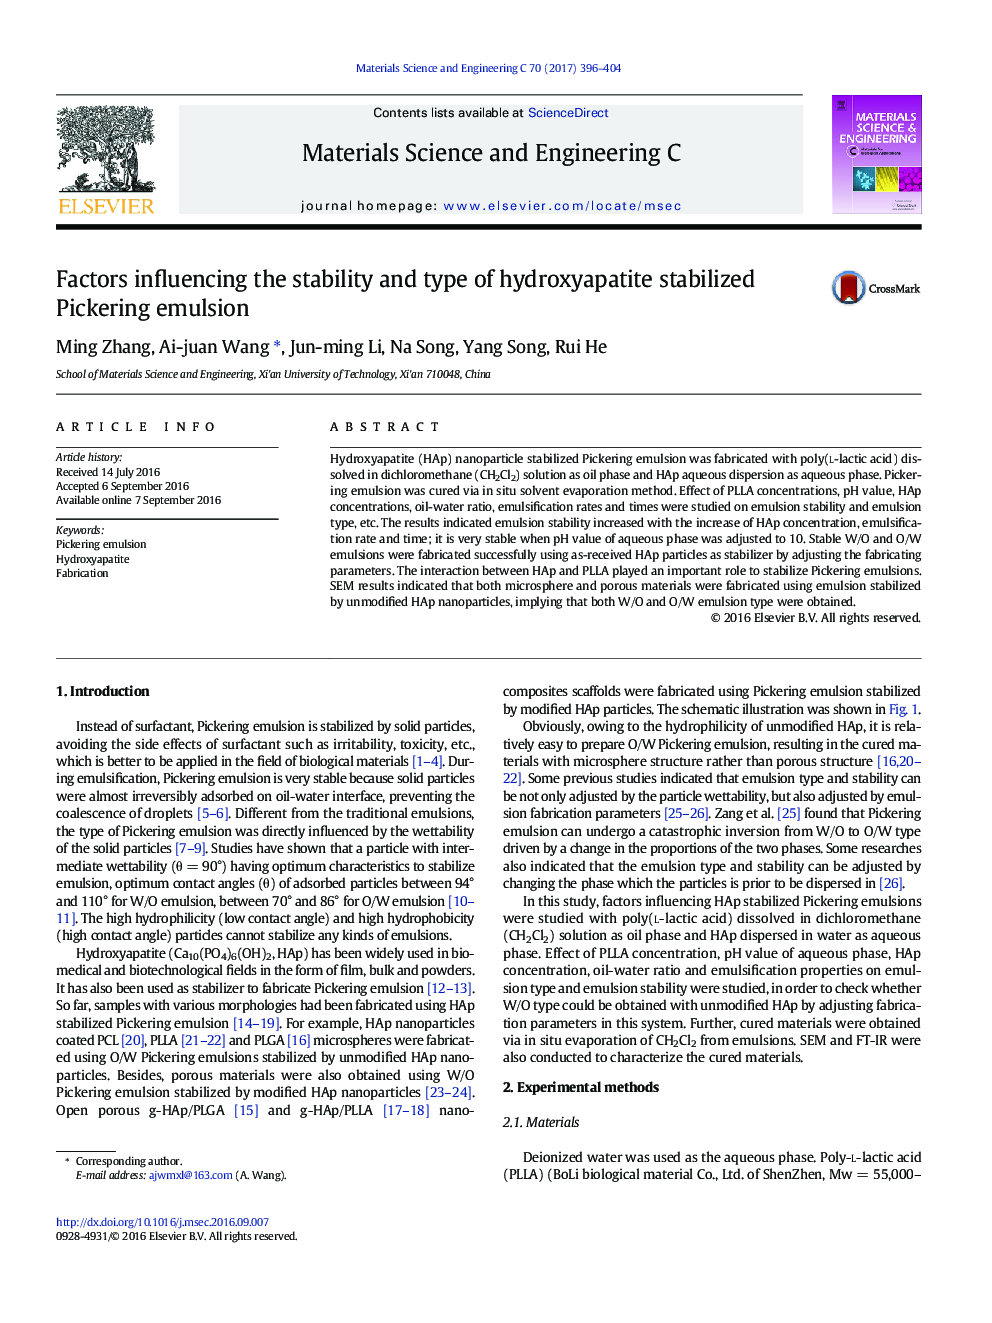 Factors influencing the stability and type of hydroxyapatite stabilized Pickering emulsion